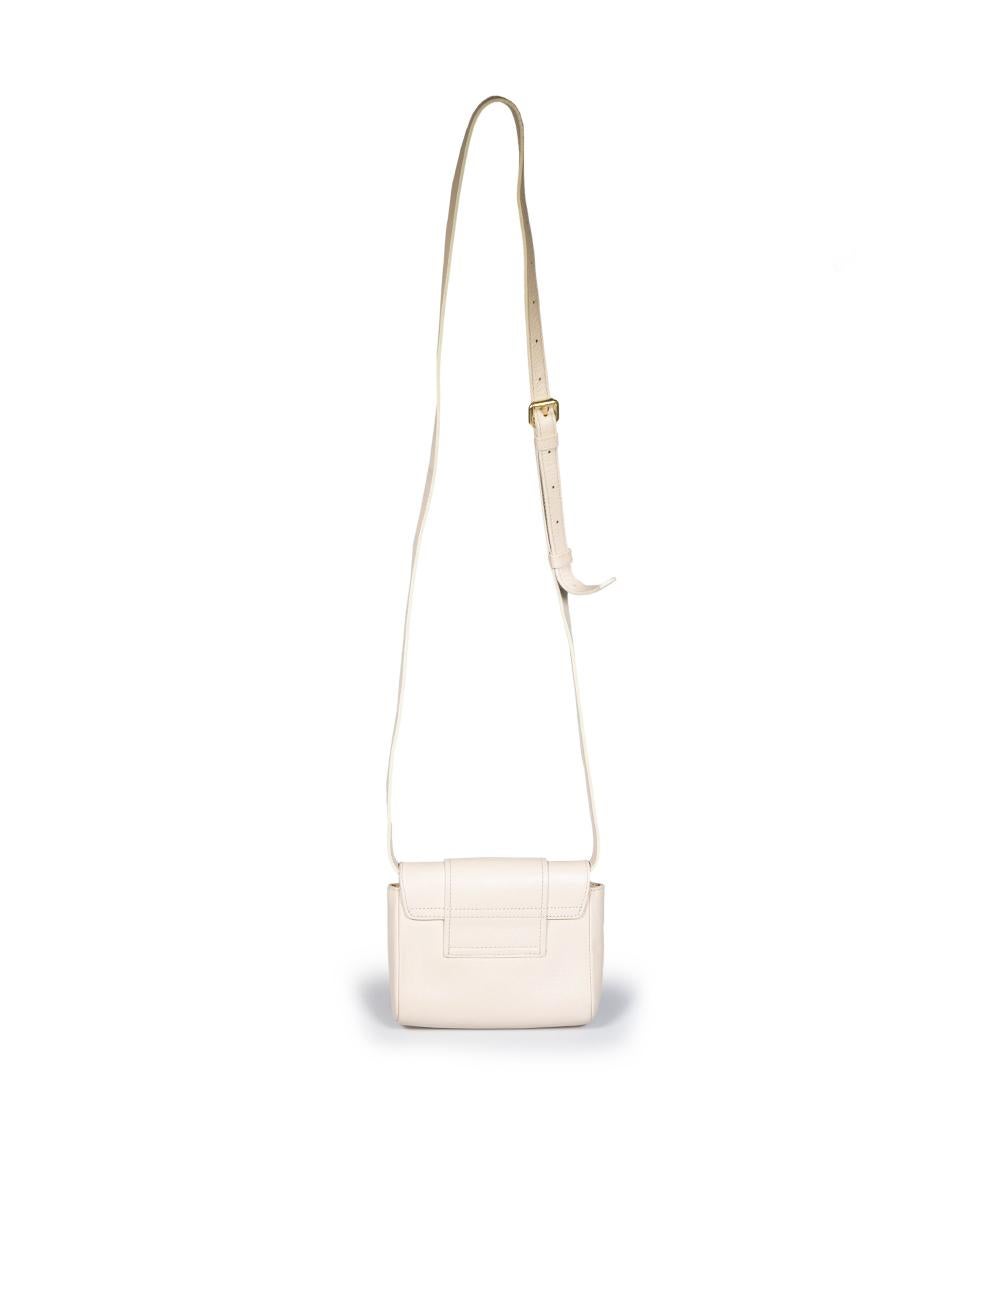 Chloé Ecru Leather Hopper Buckle Crossbody Bag In Excellent Condition For Sale In London, GB